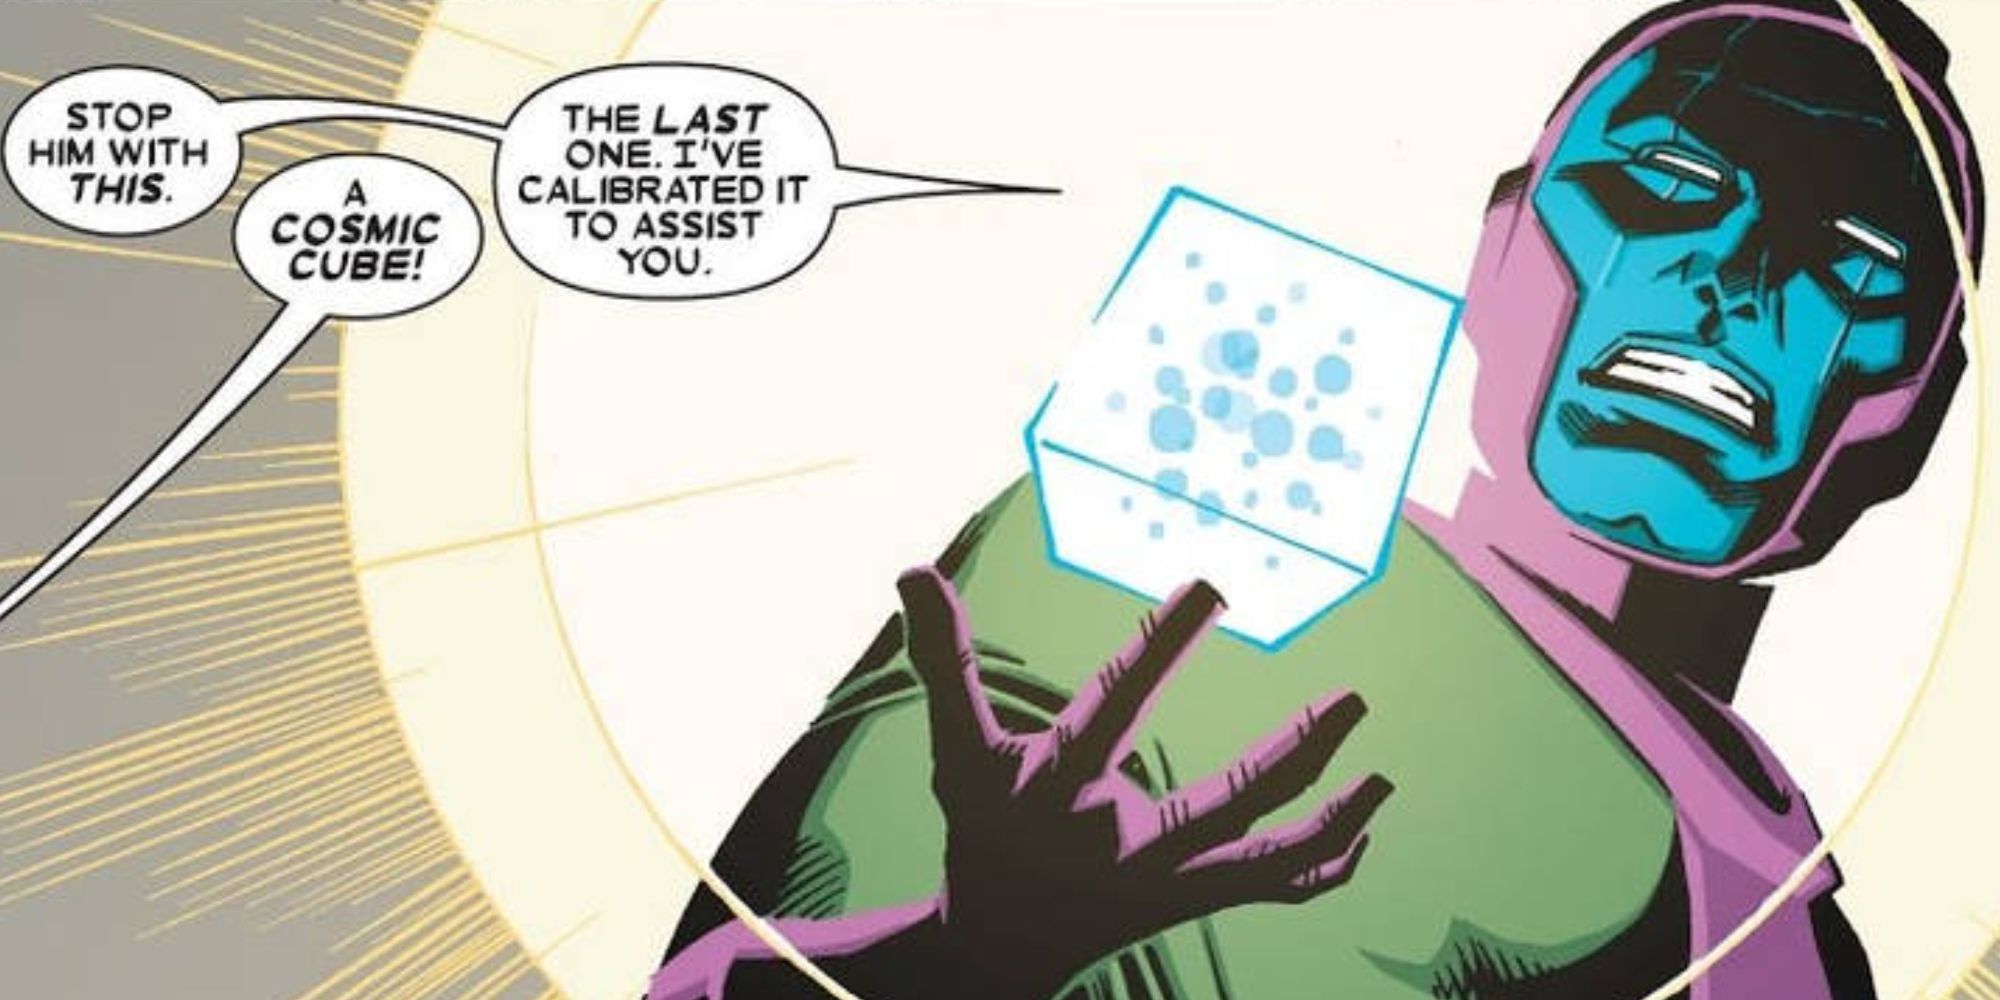 Kang The Conqueror wields the Cosmic Cube in Marvel Comics.